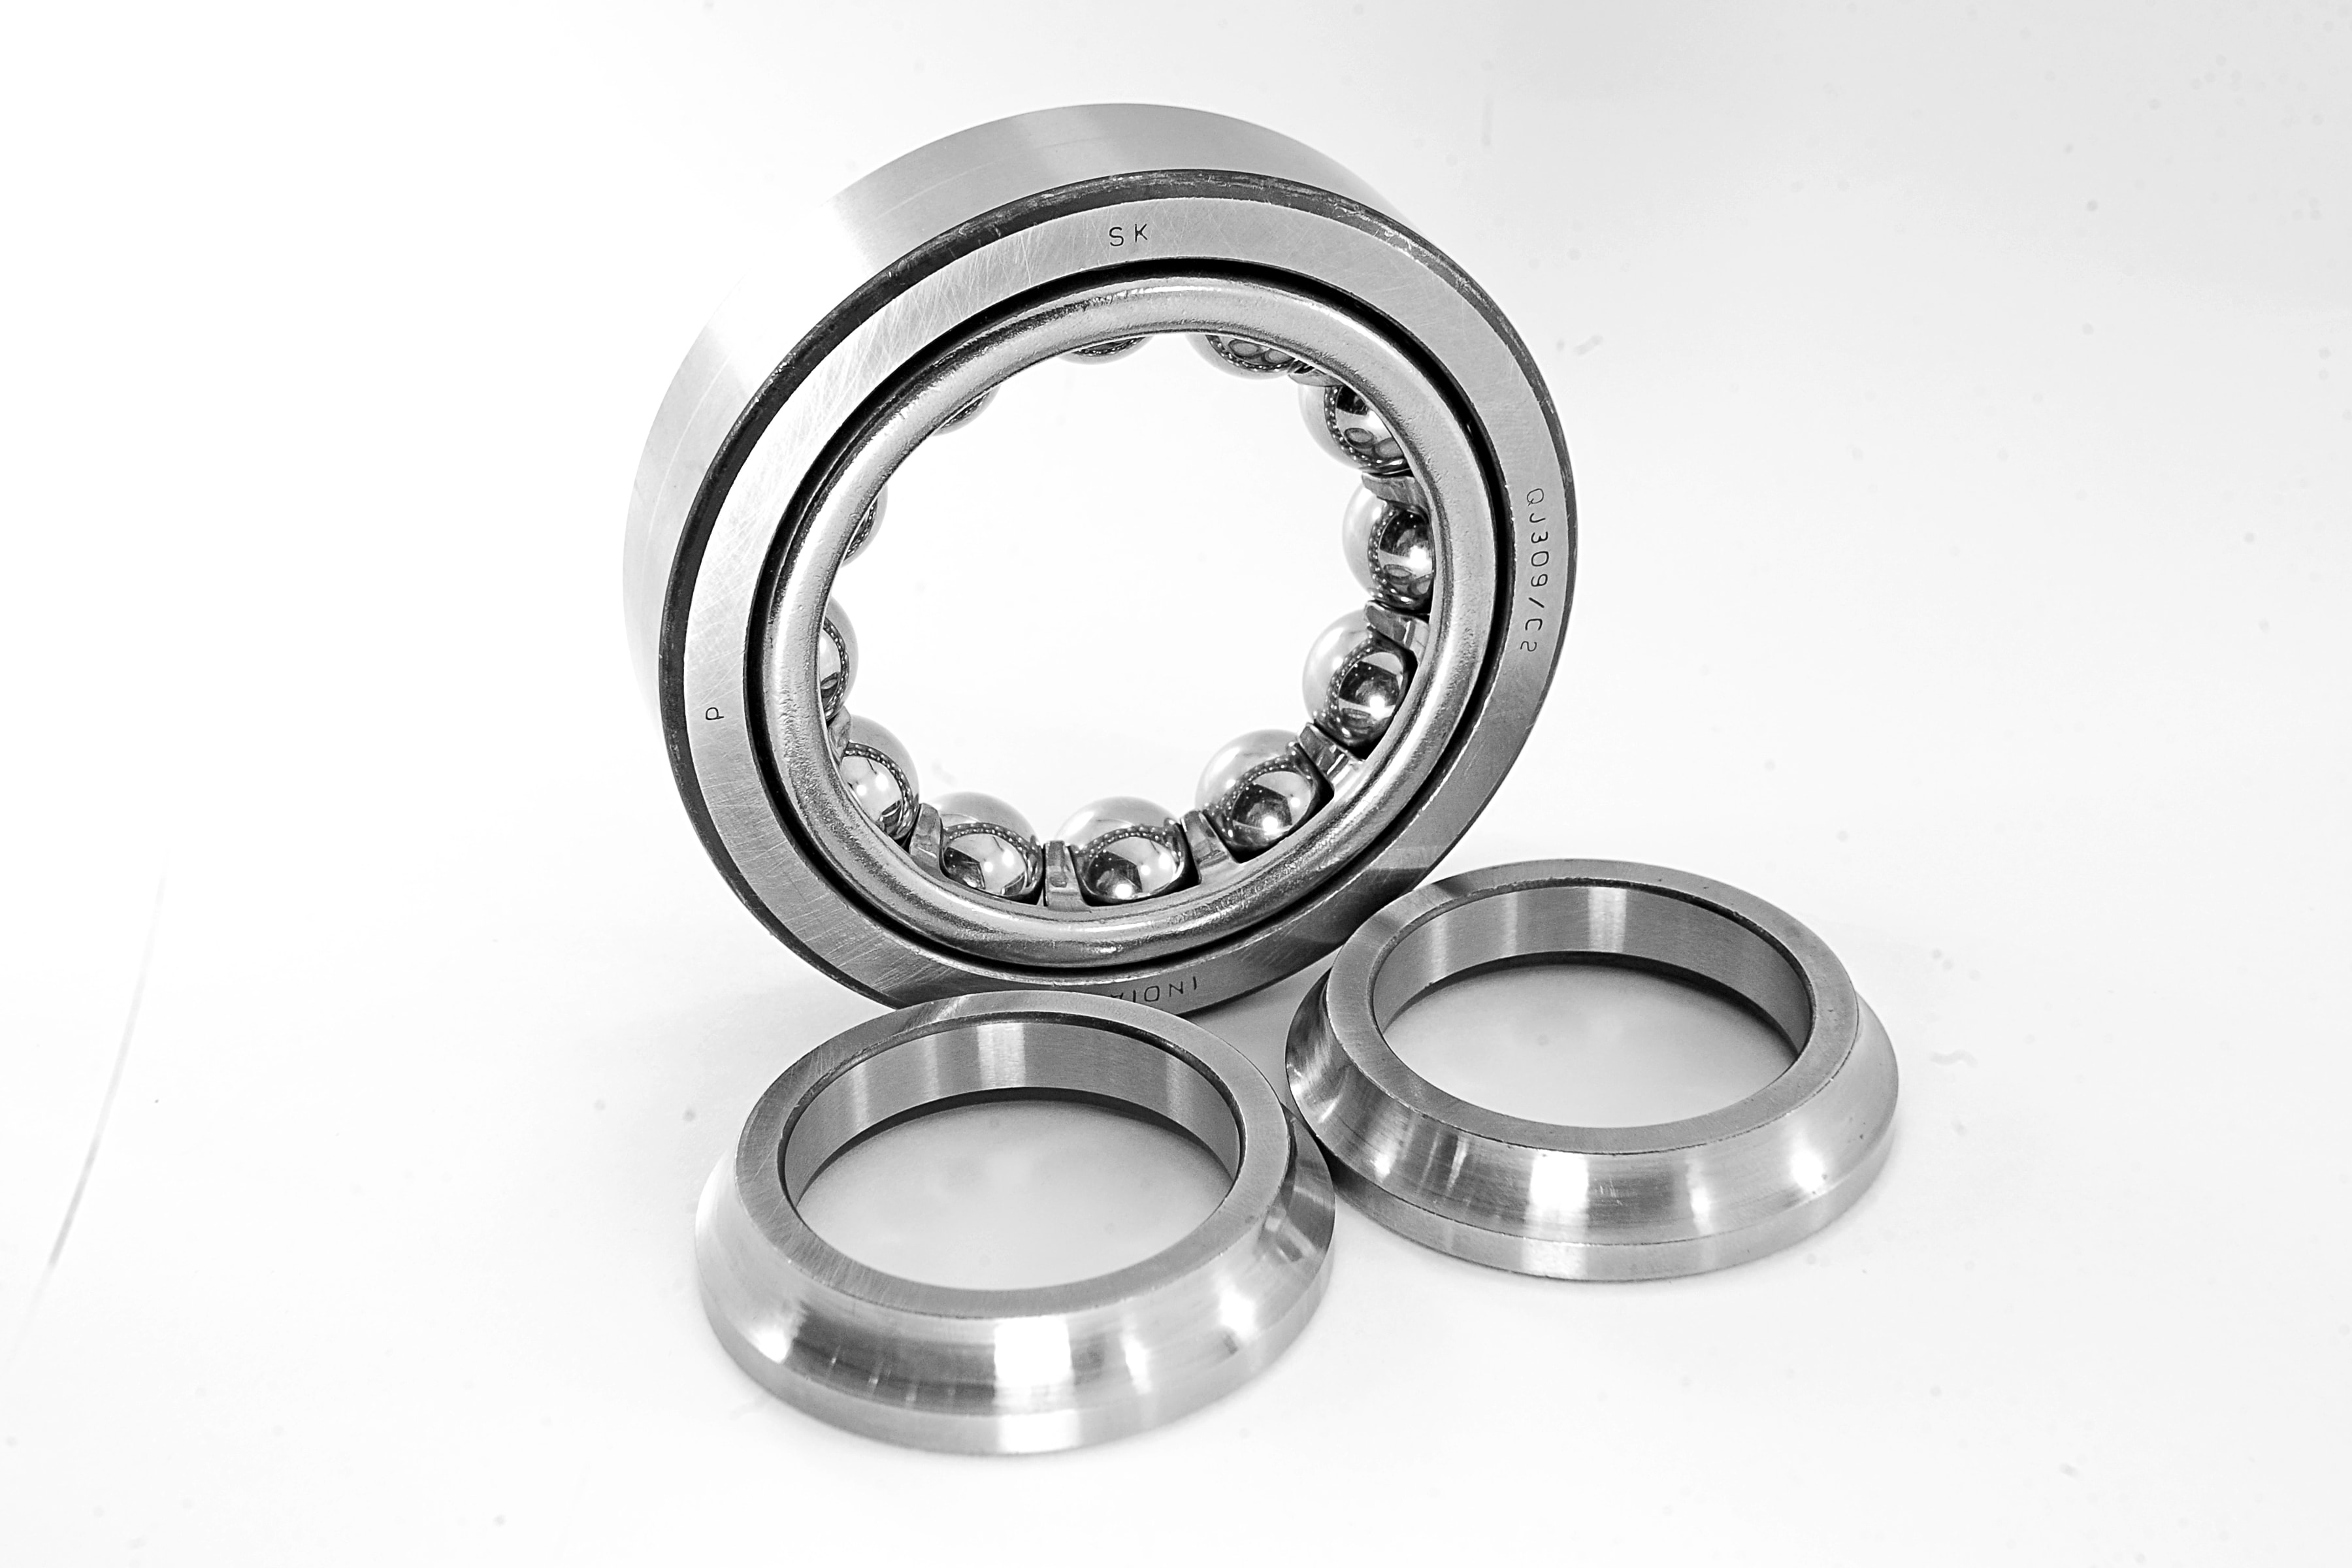 FOUR POINT BEARINGS